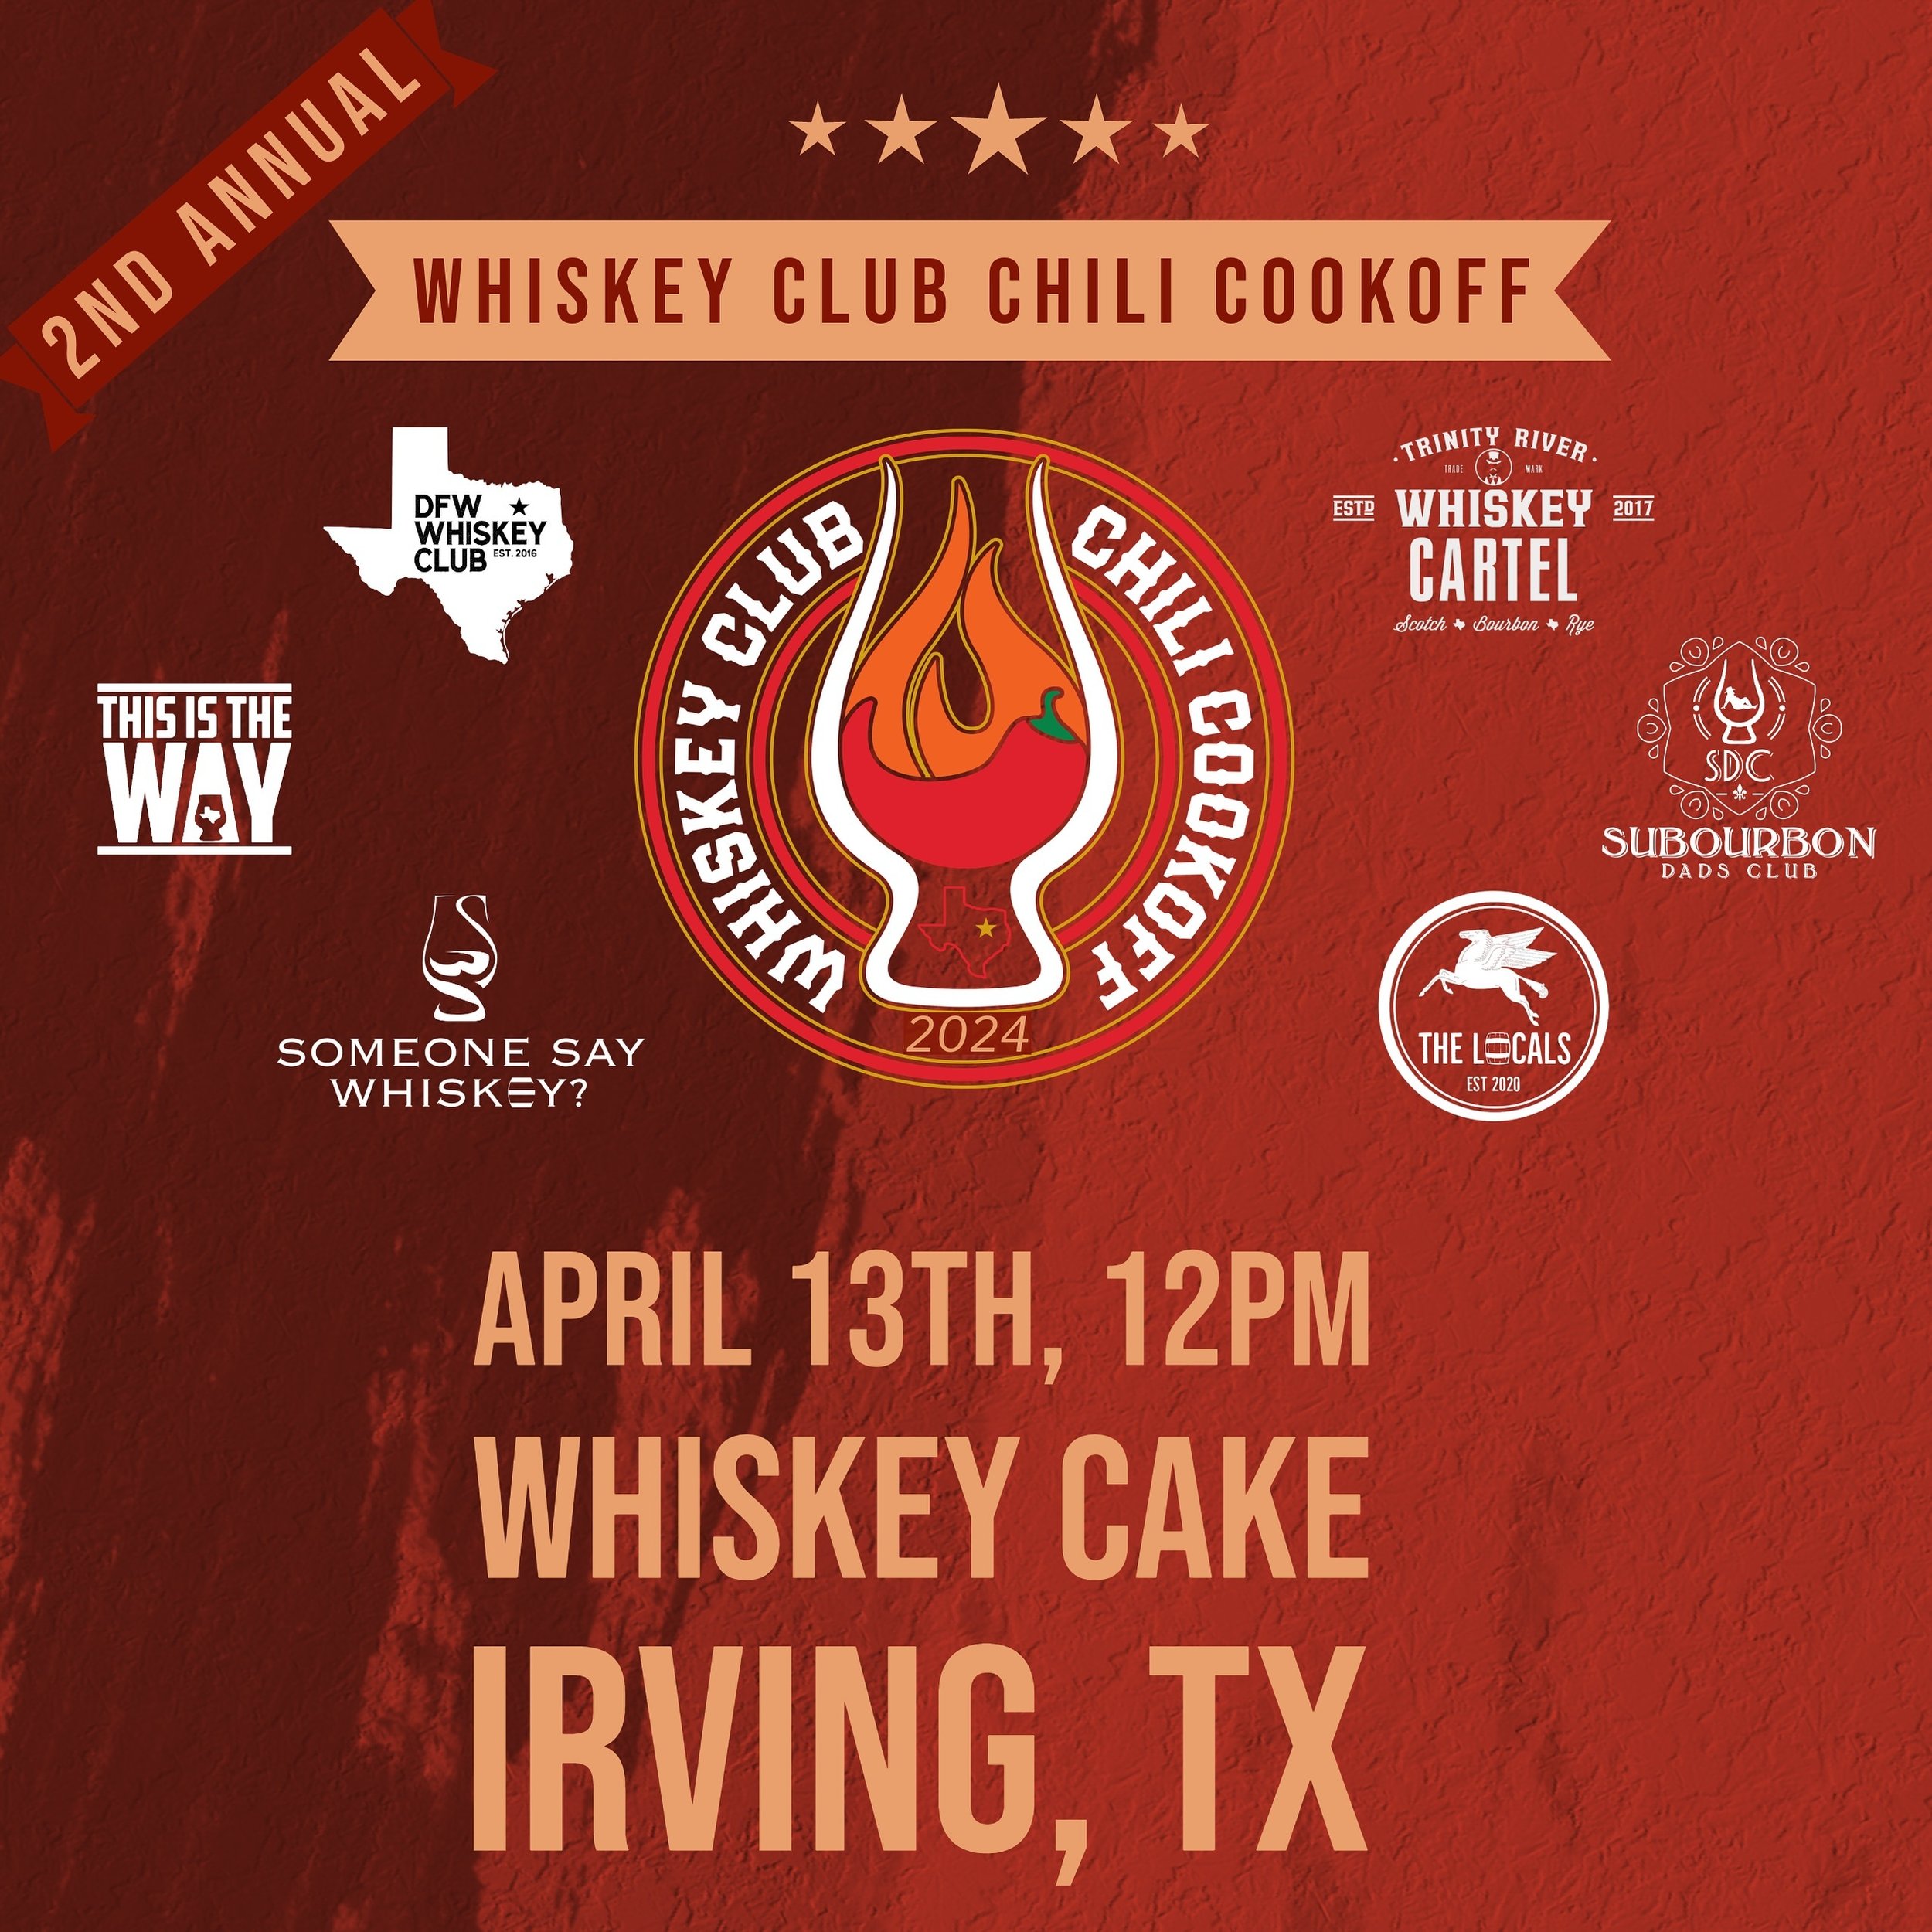 Do beans belong in chili? Or is a blissful bowl of Texas red the one true path to chili nirvana? All we know for sure is, you&rsquo;re going to need some of our tasty whiskey to wash down all the deliciousness at @whiskeycakelc this Saturday!
Join us